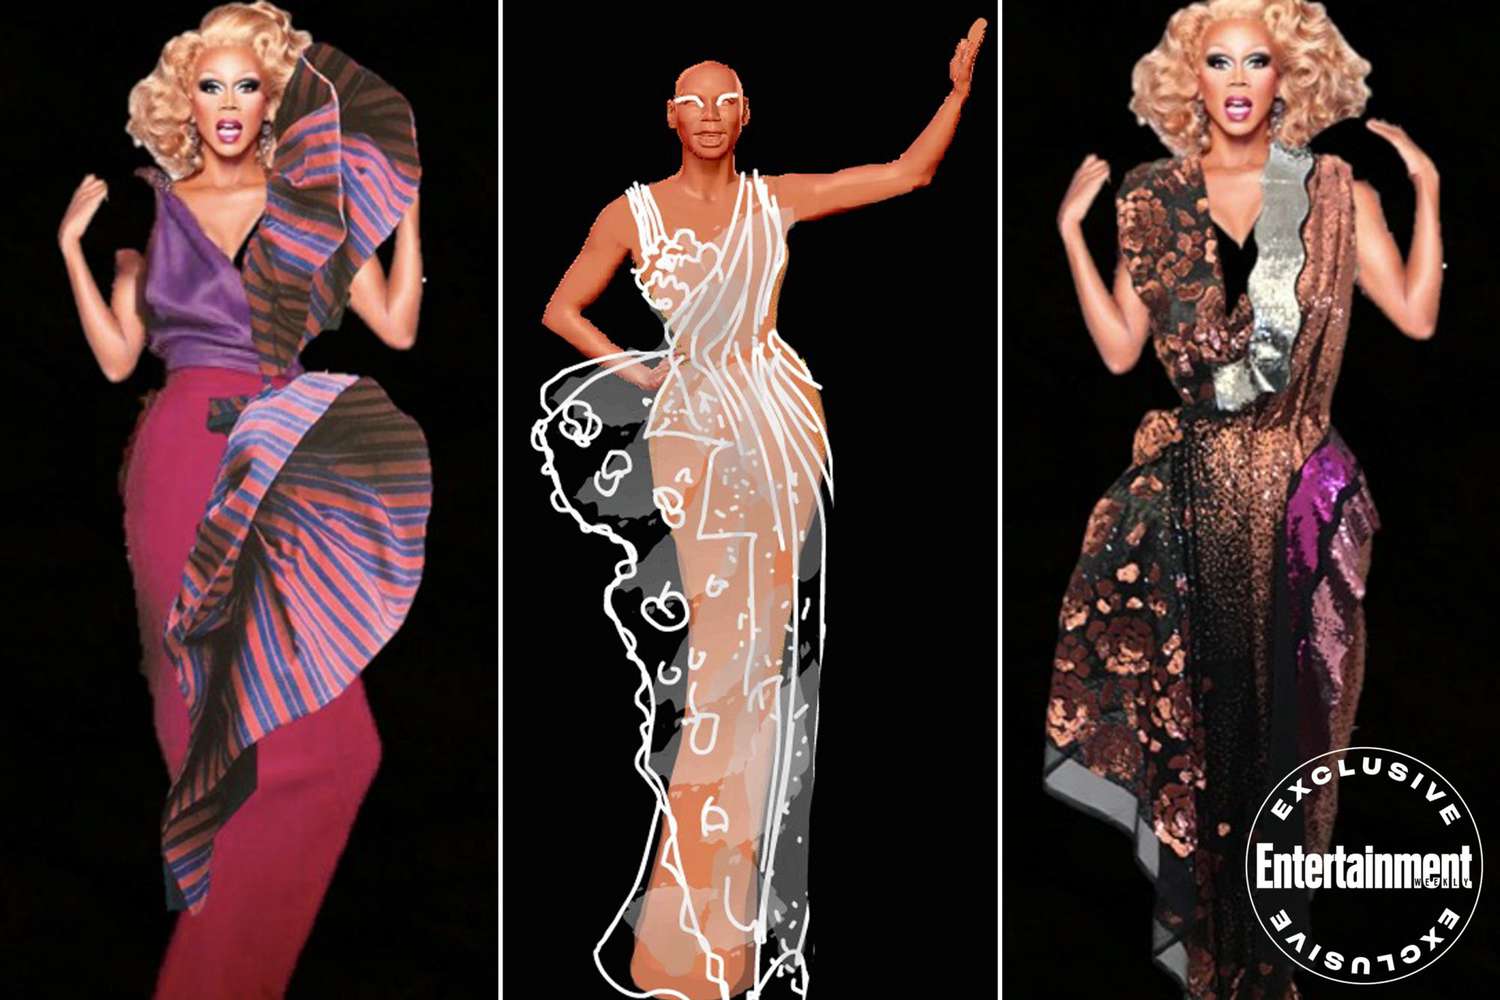 Drag Gowns